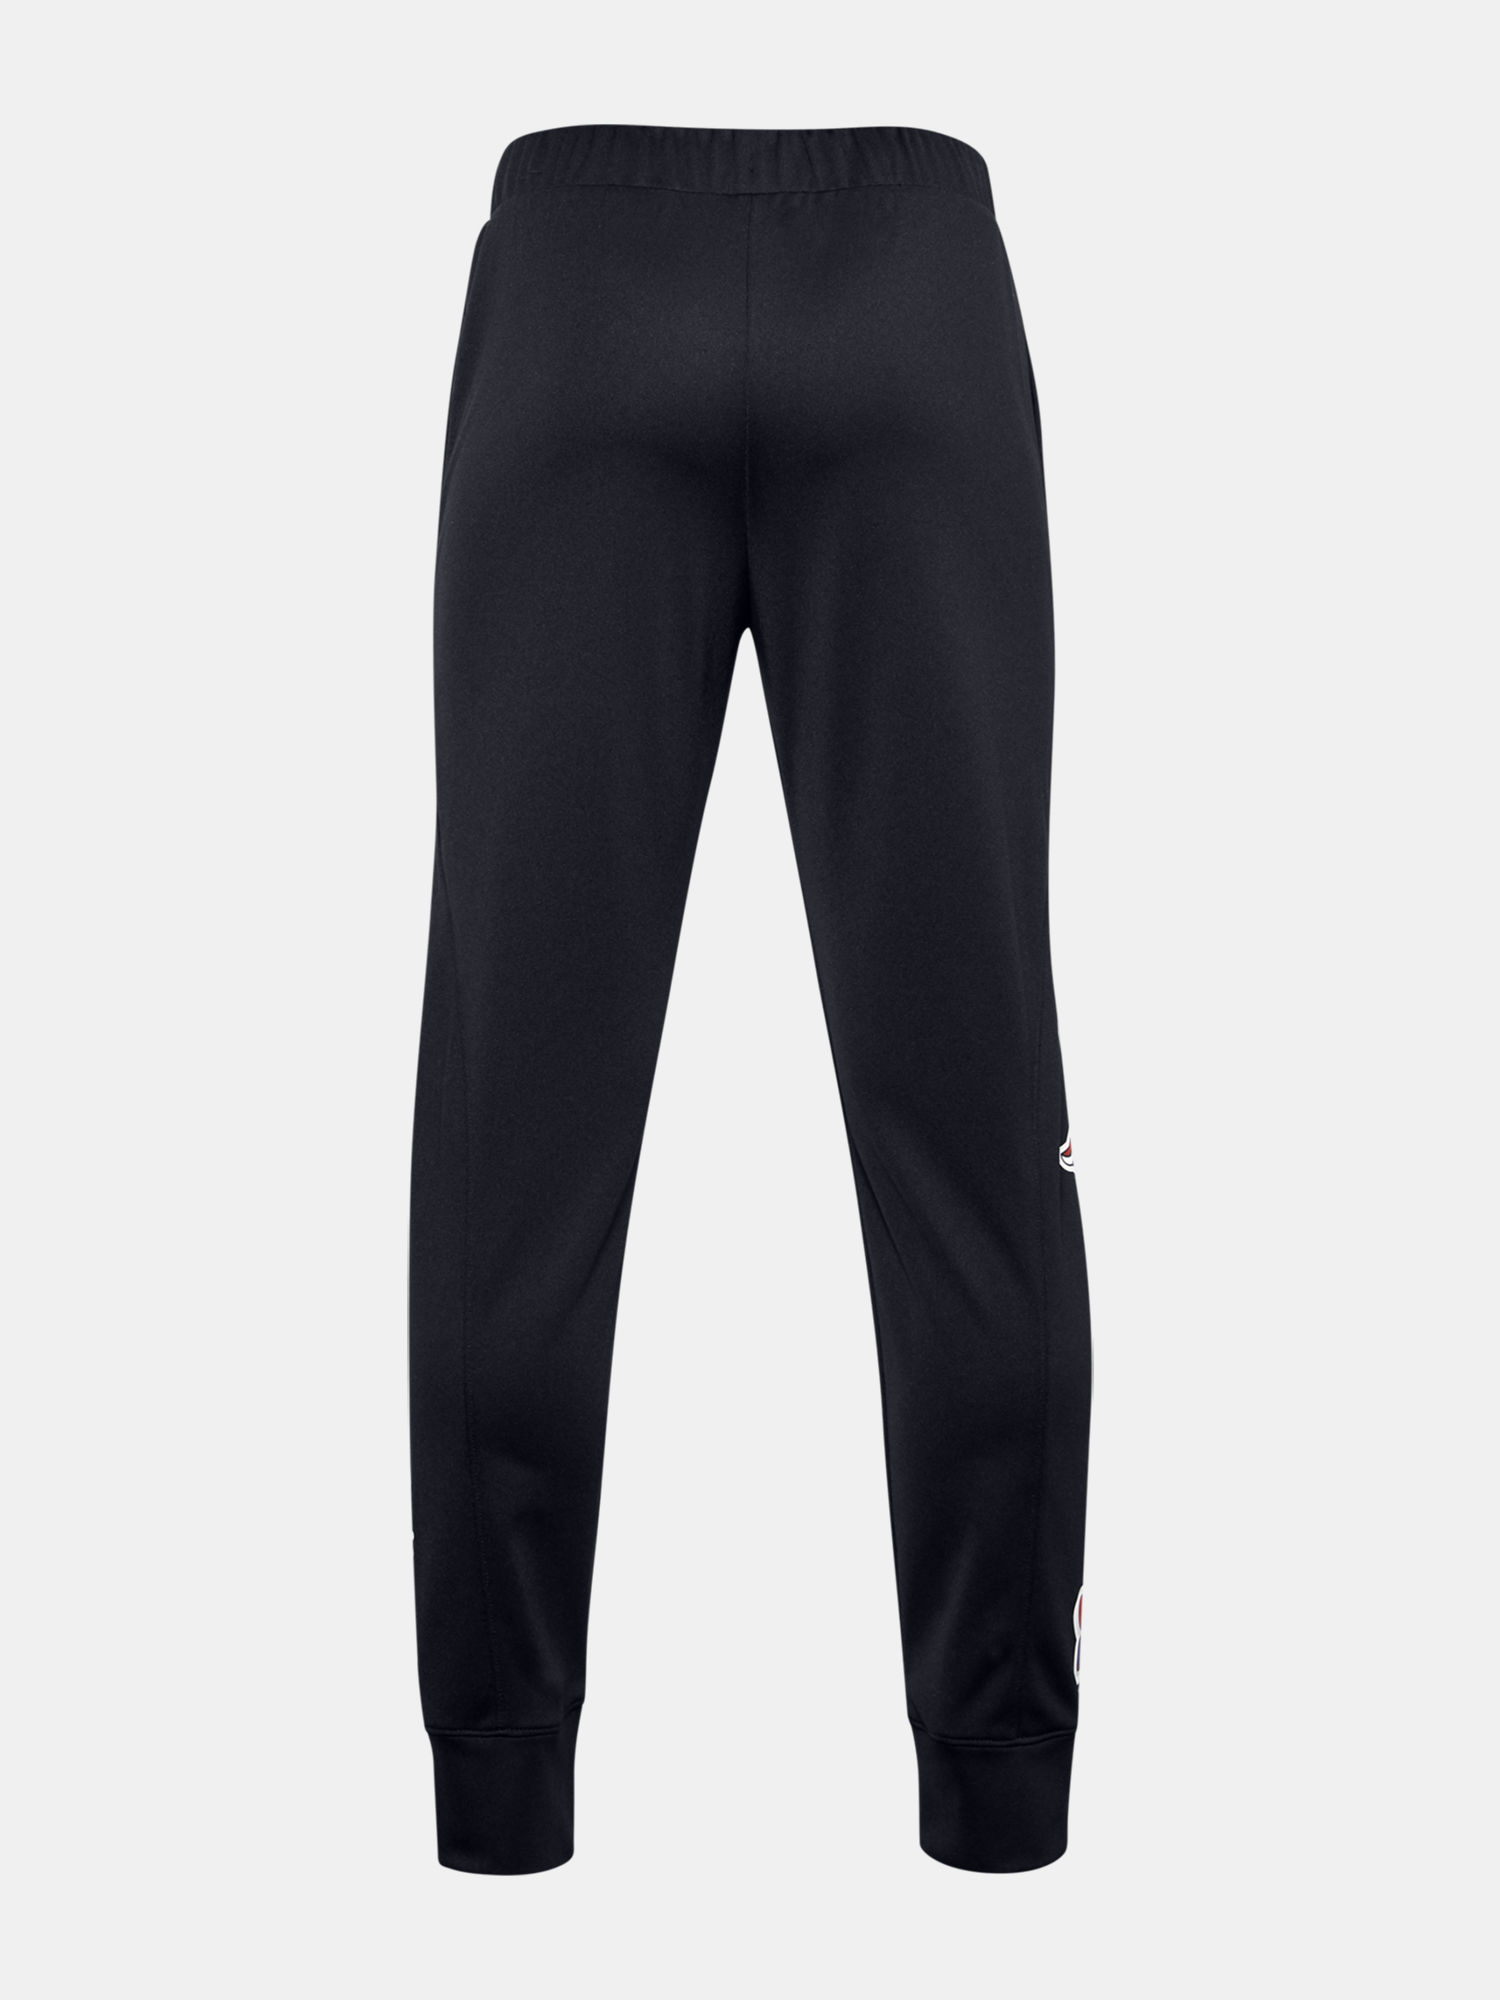 Nohavice Under Armour Boys Perf Pant-BLK (2)